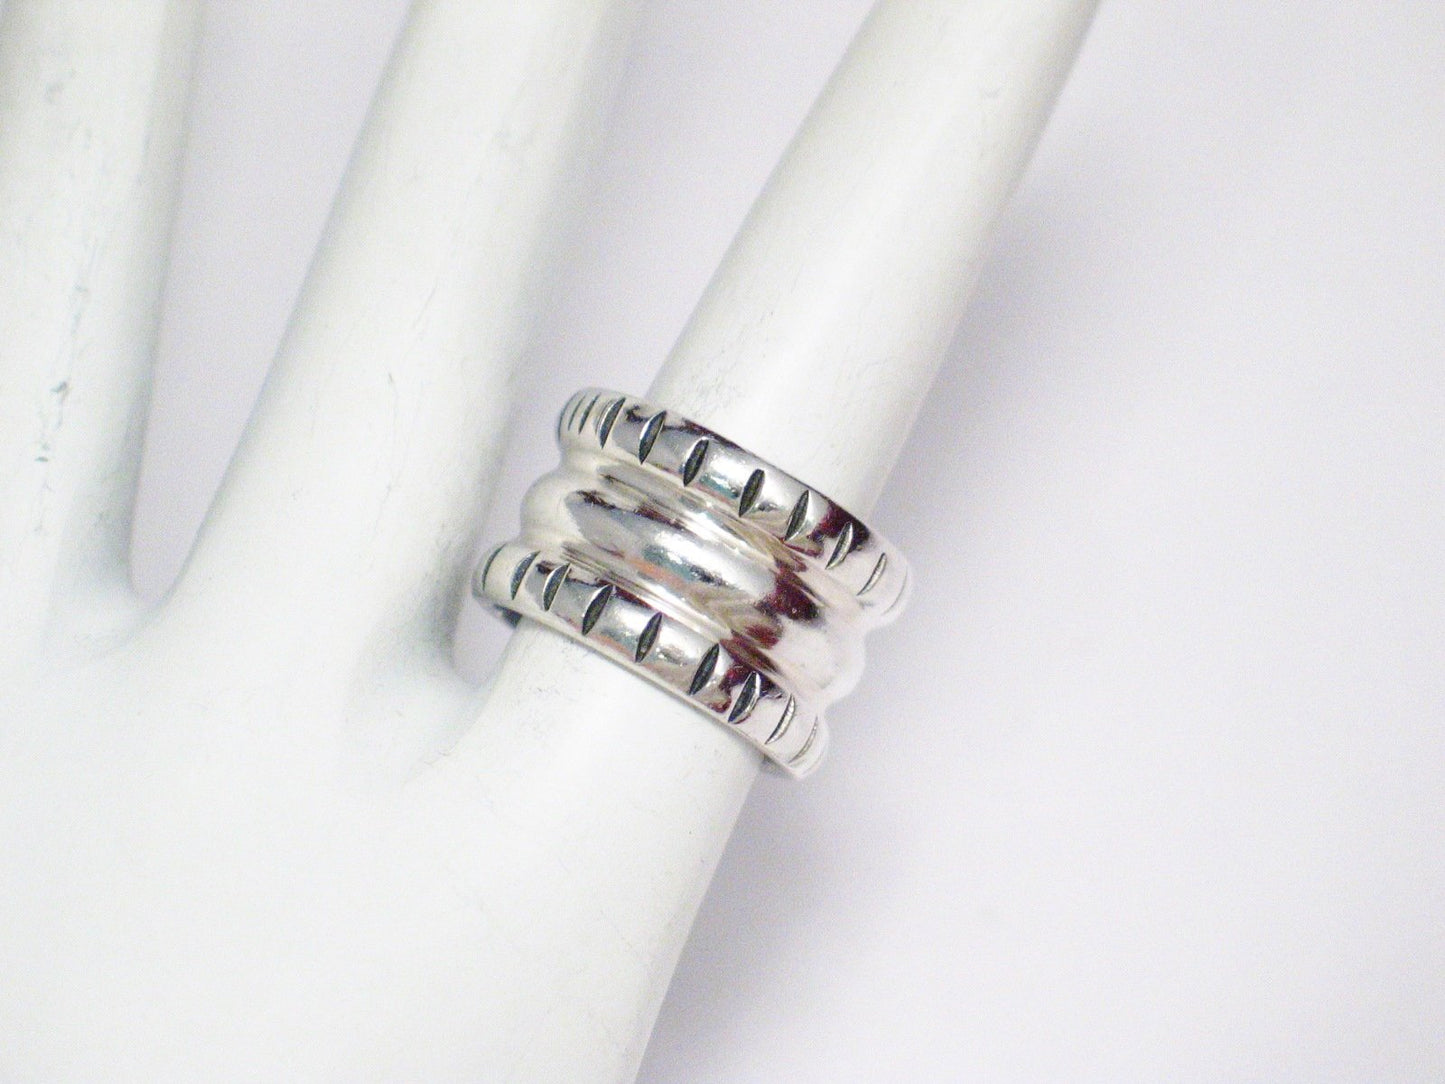 Cigar Band Ring, sz6.25 Lined Pattern Design Wide Sterling Silver Ring - Discount Estate Jewelry